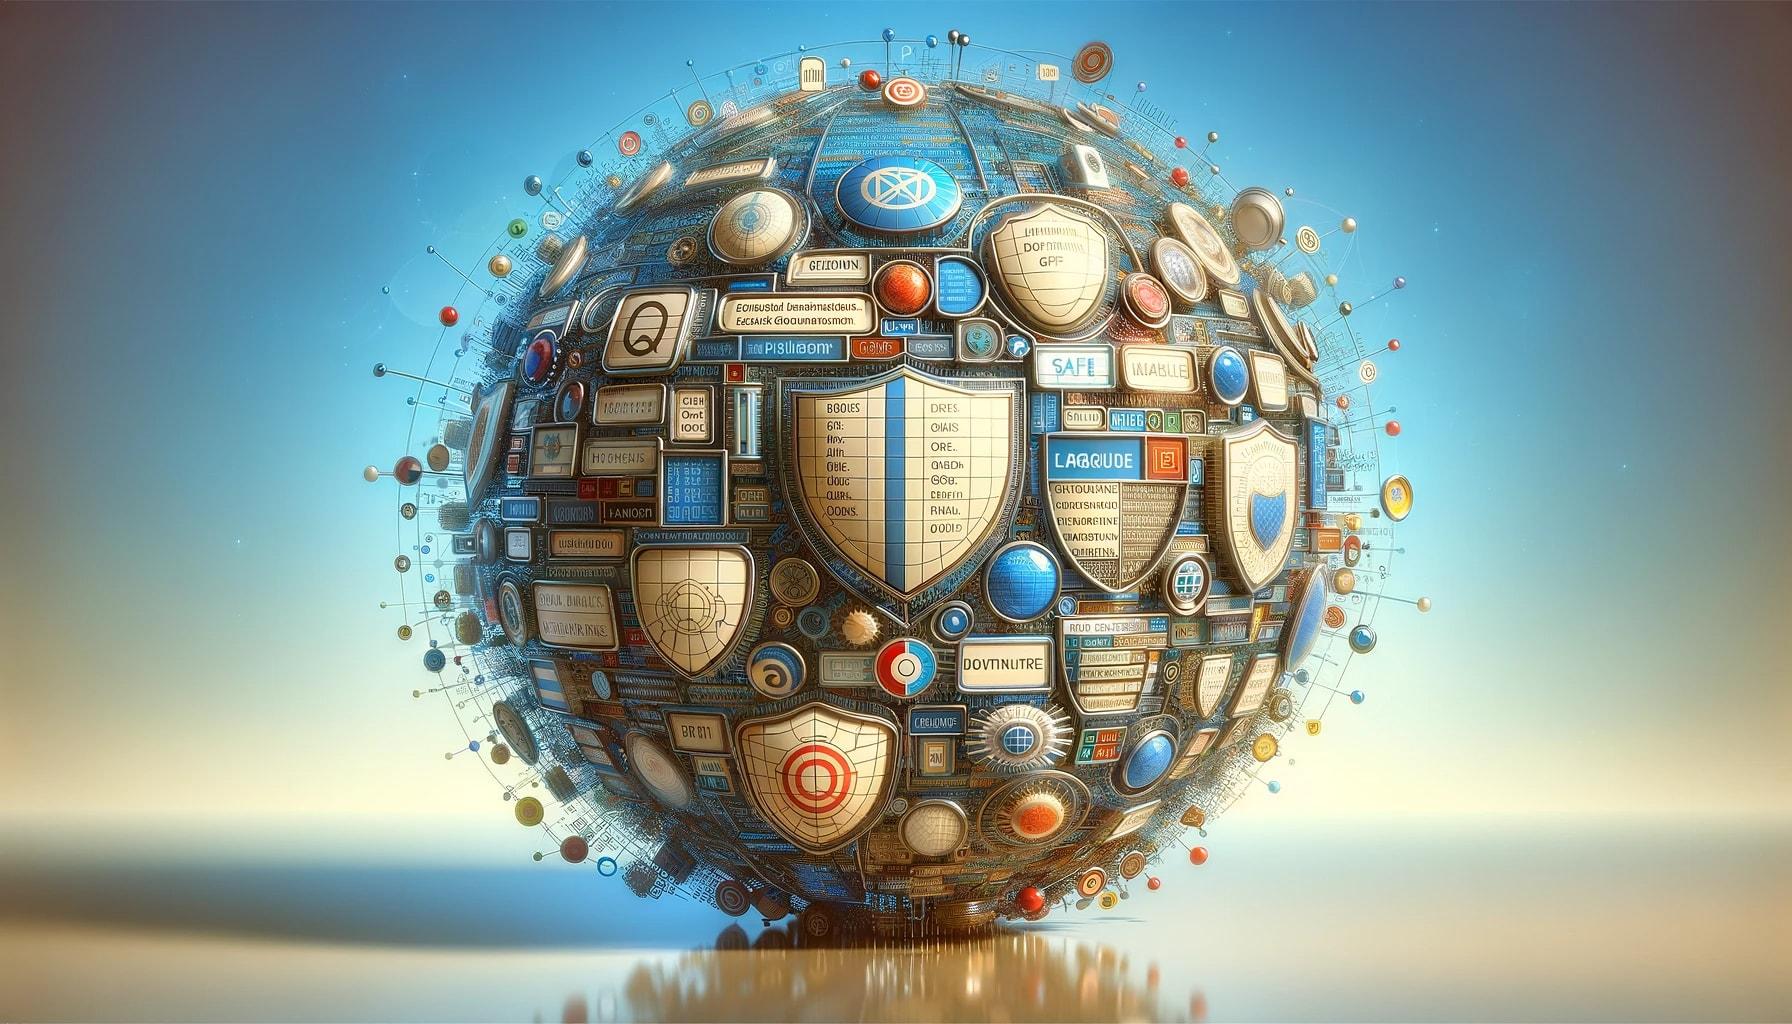 an intricate globe-like structure composed of words and codes, representing a large language model, surrounded by various shields or barriers. The serene blue background conveys safety and stability in the deployment of these models.